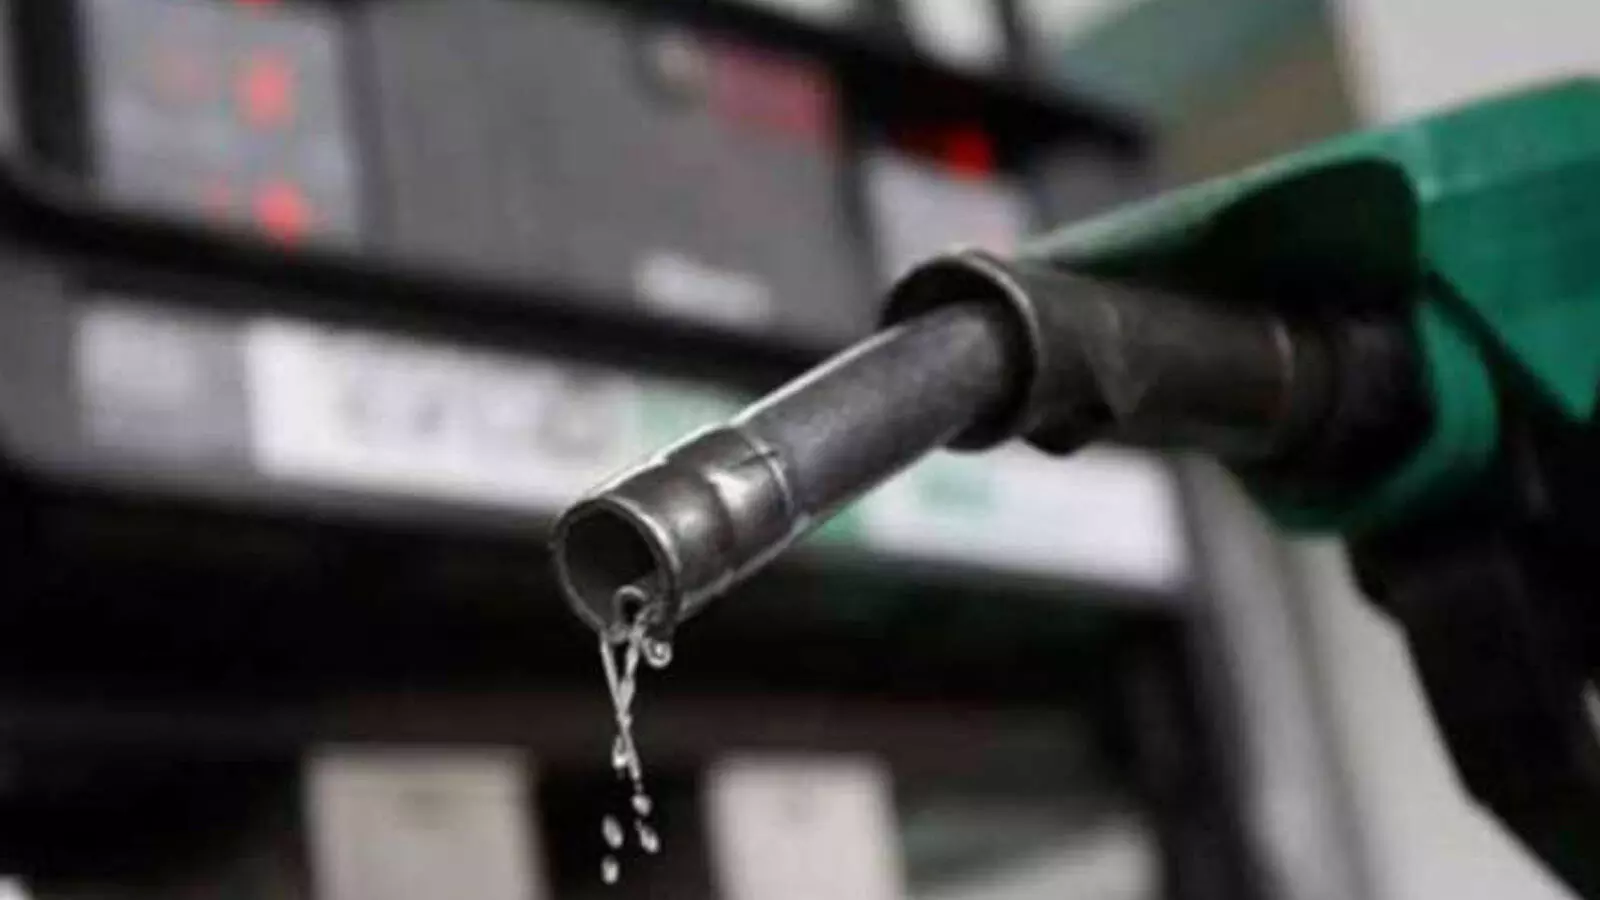 Petrol Diesel Price: Fuel prices remain unchanged for 3rd straight day